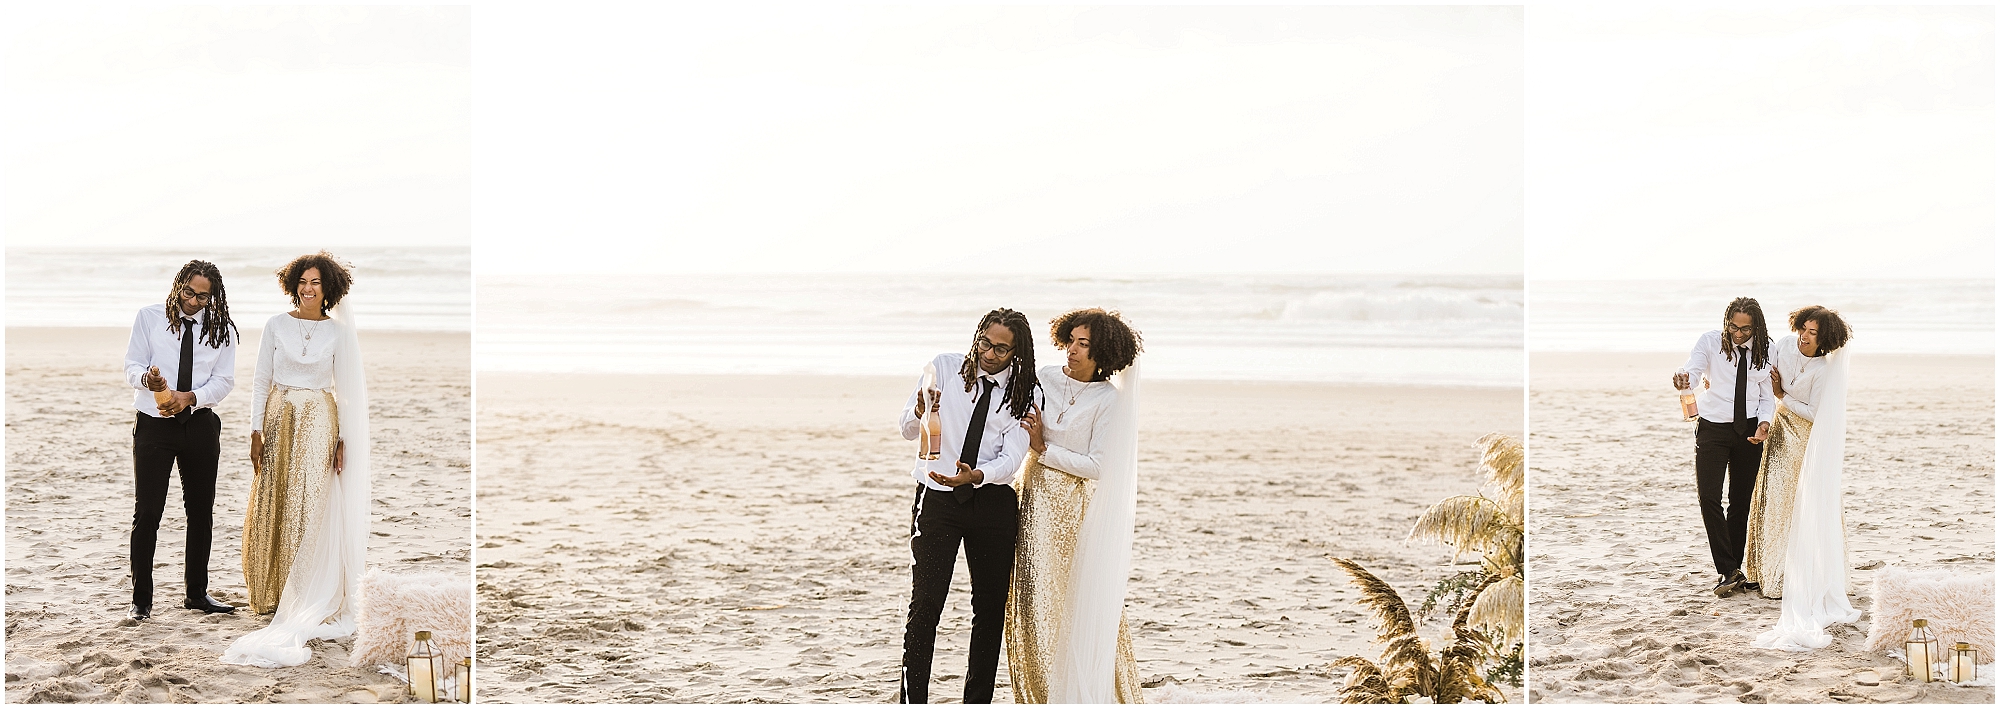 A black couple pops champagne on the beach to celebrate their wedding day during a beautiful Oregon Coast elopement in Neskowin. | Erica Swantek Photography